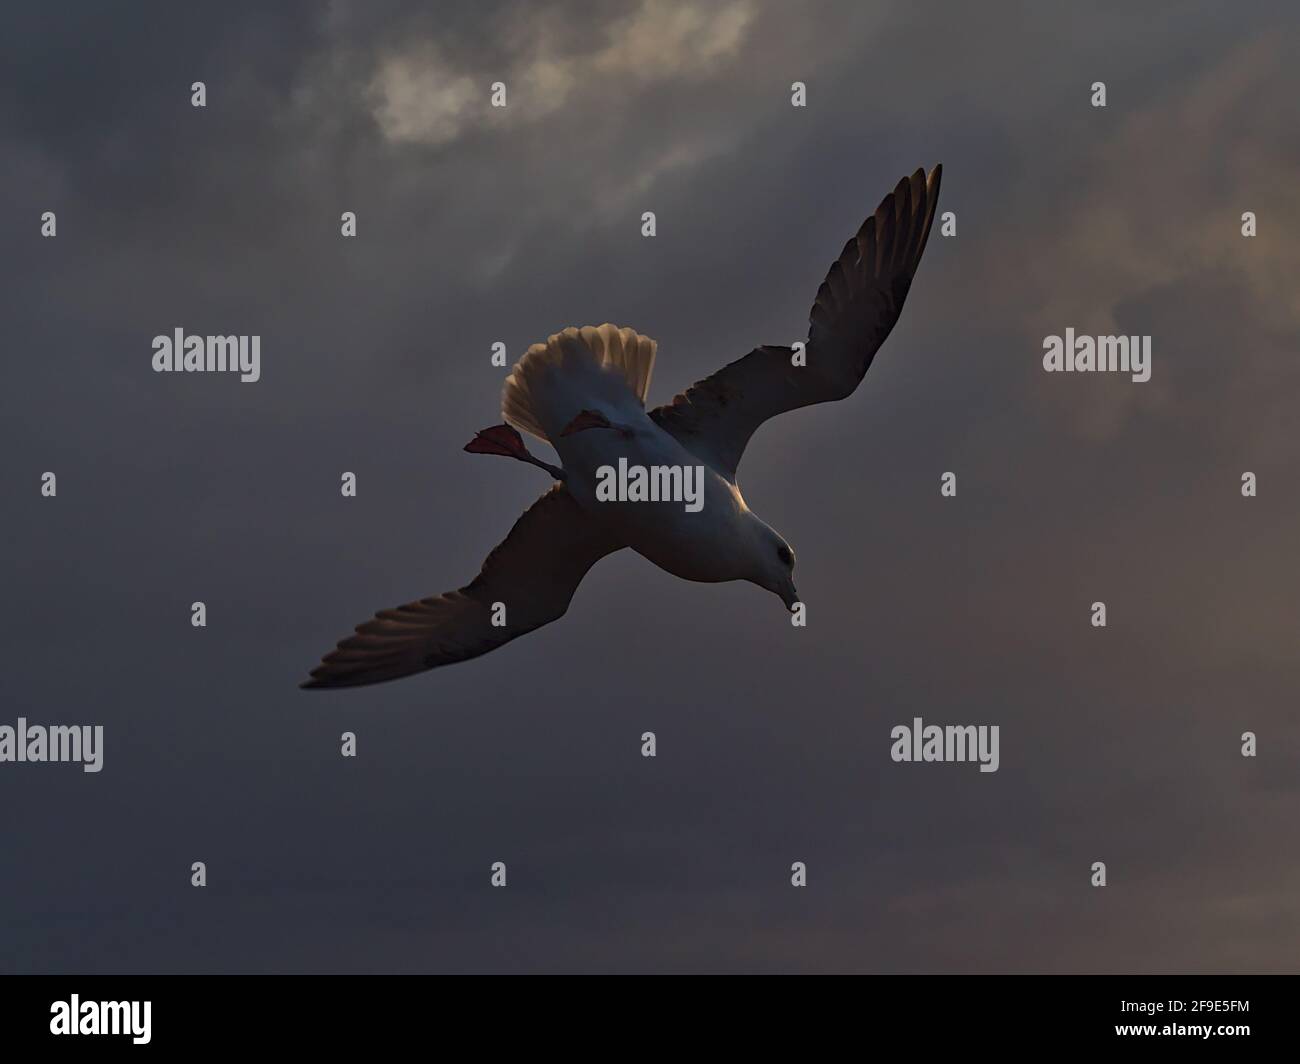 Closeup low angle view of single flying northern fulmar bird (fulmarus glacialis) with spread white colored wings in the evening light at sunset. Stock Photo